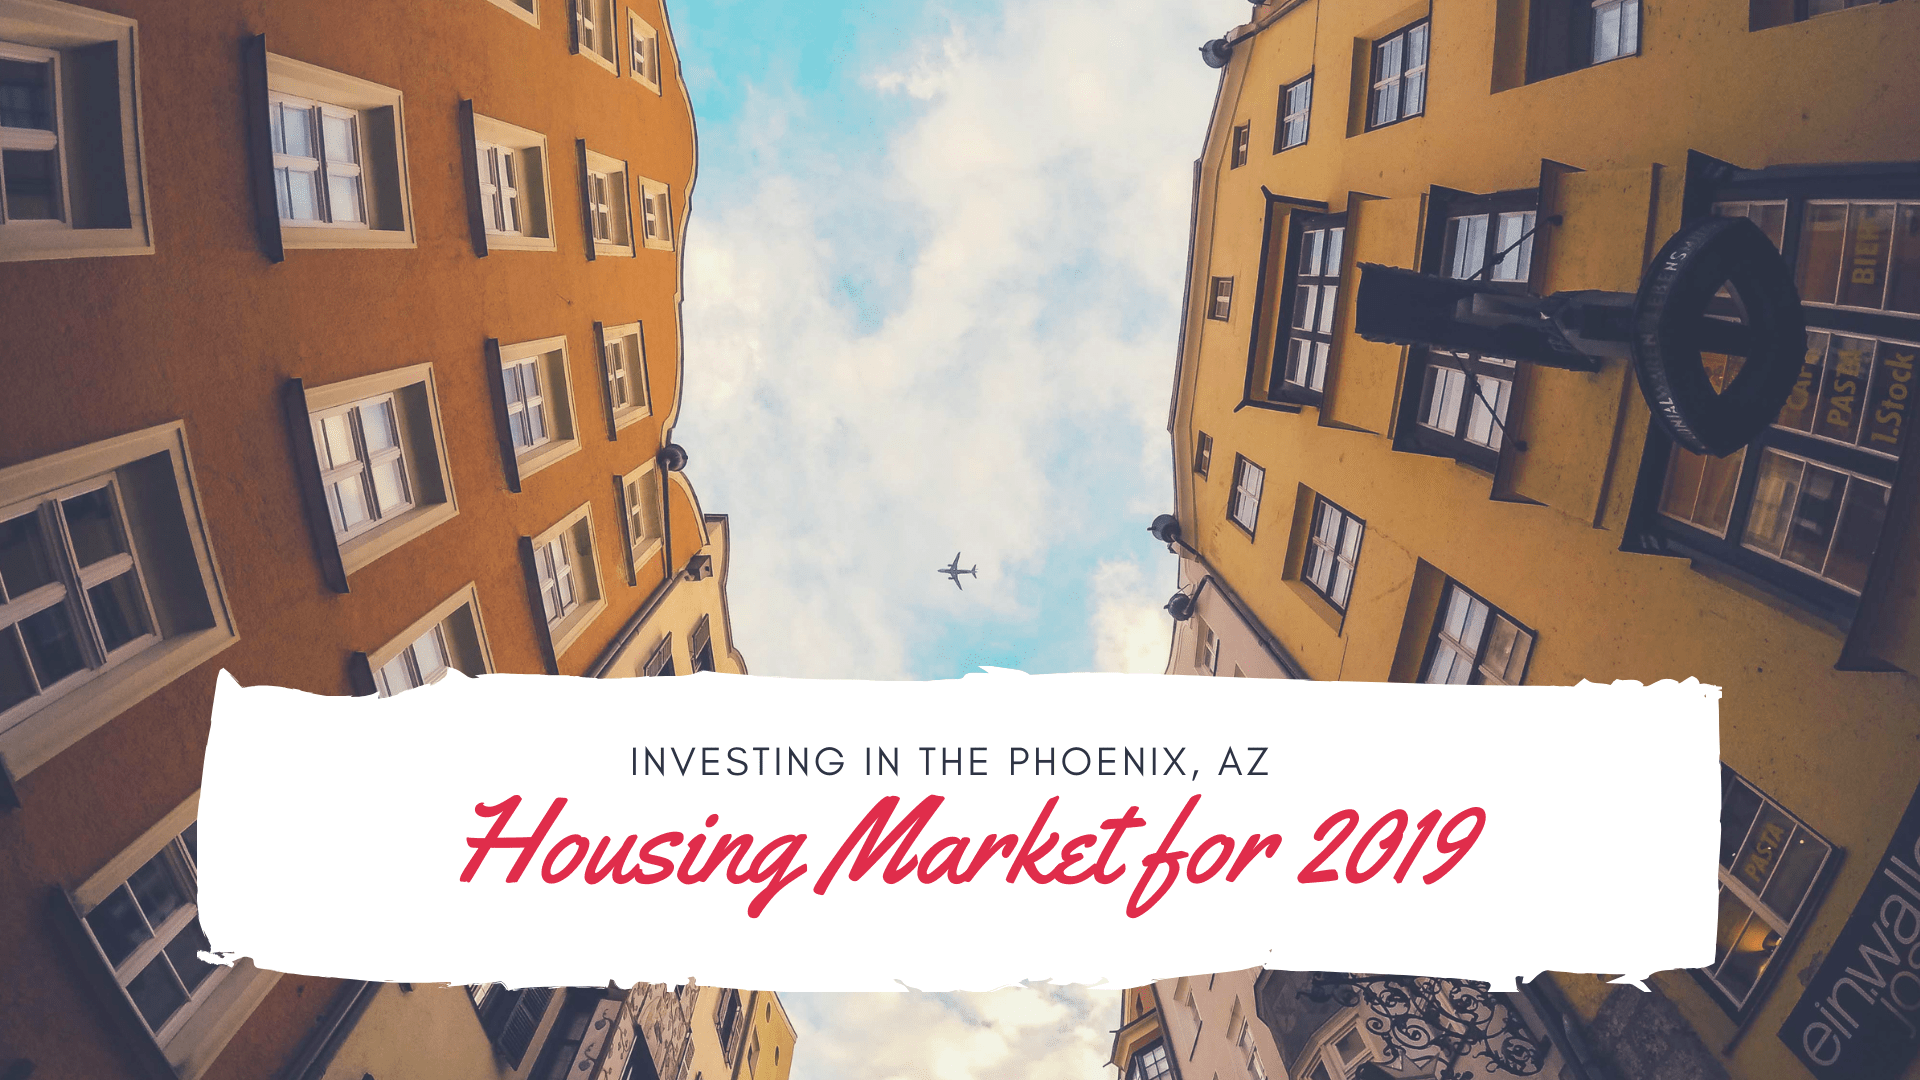 Investing in the Phoenix, AZ Housing Market for 2019